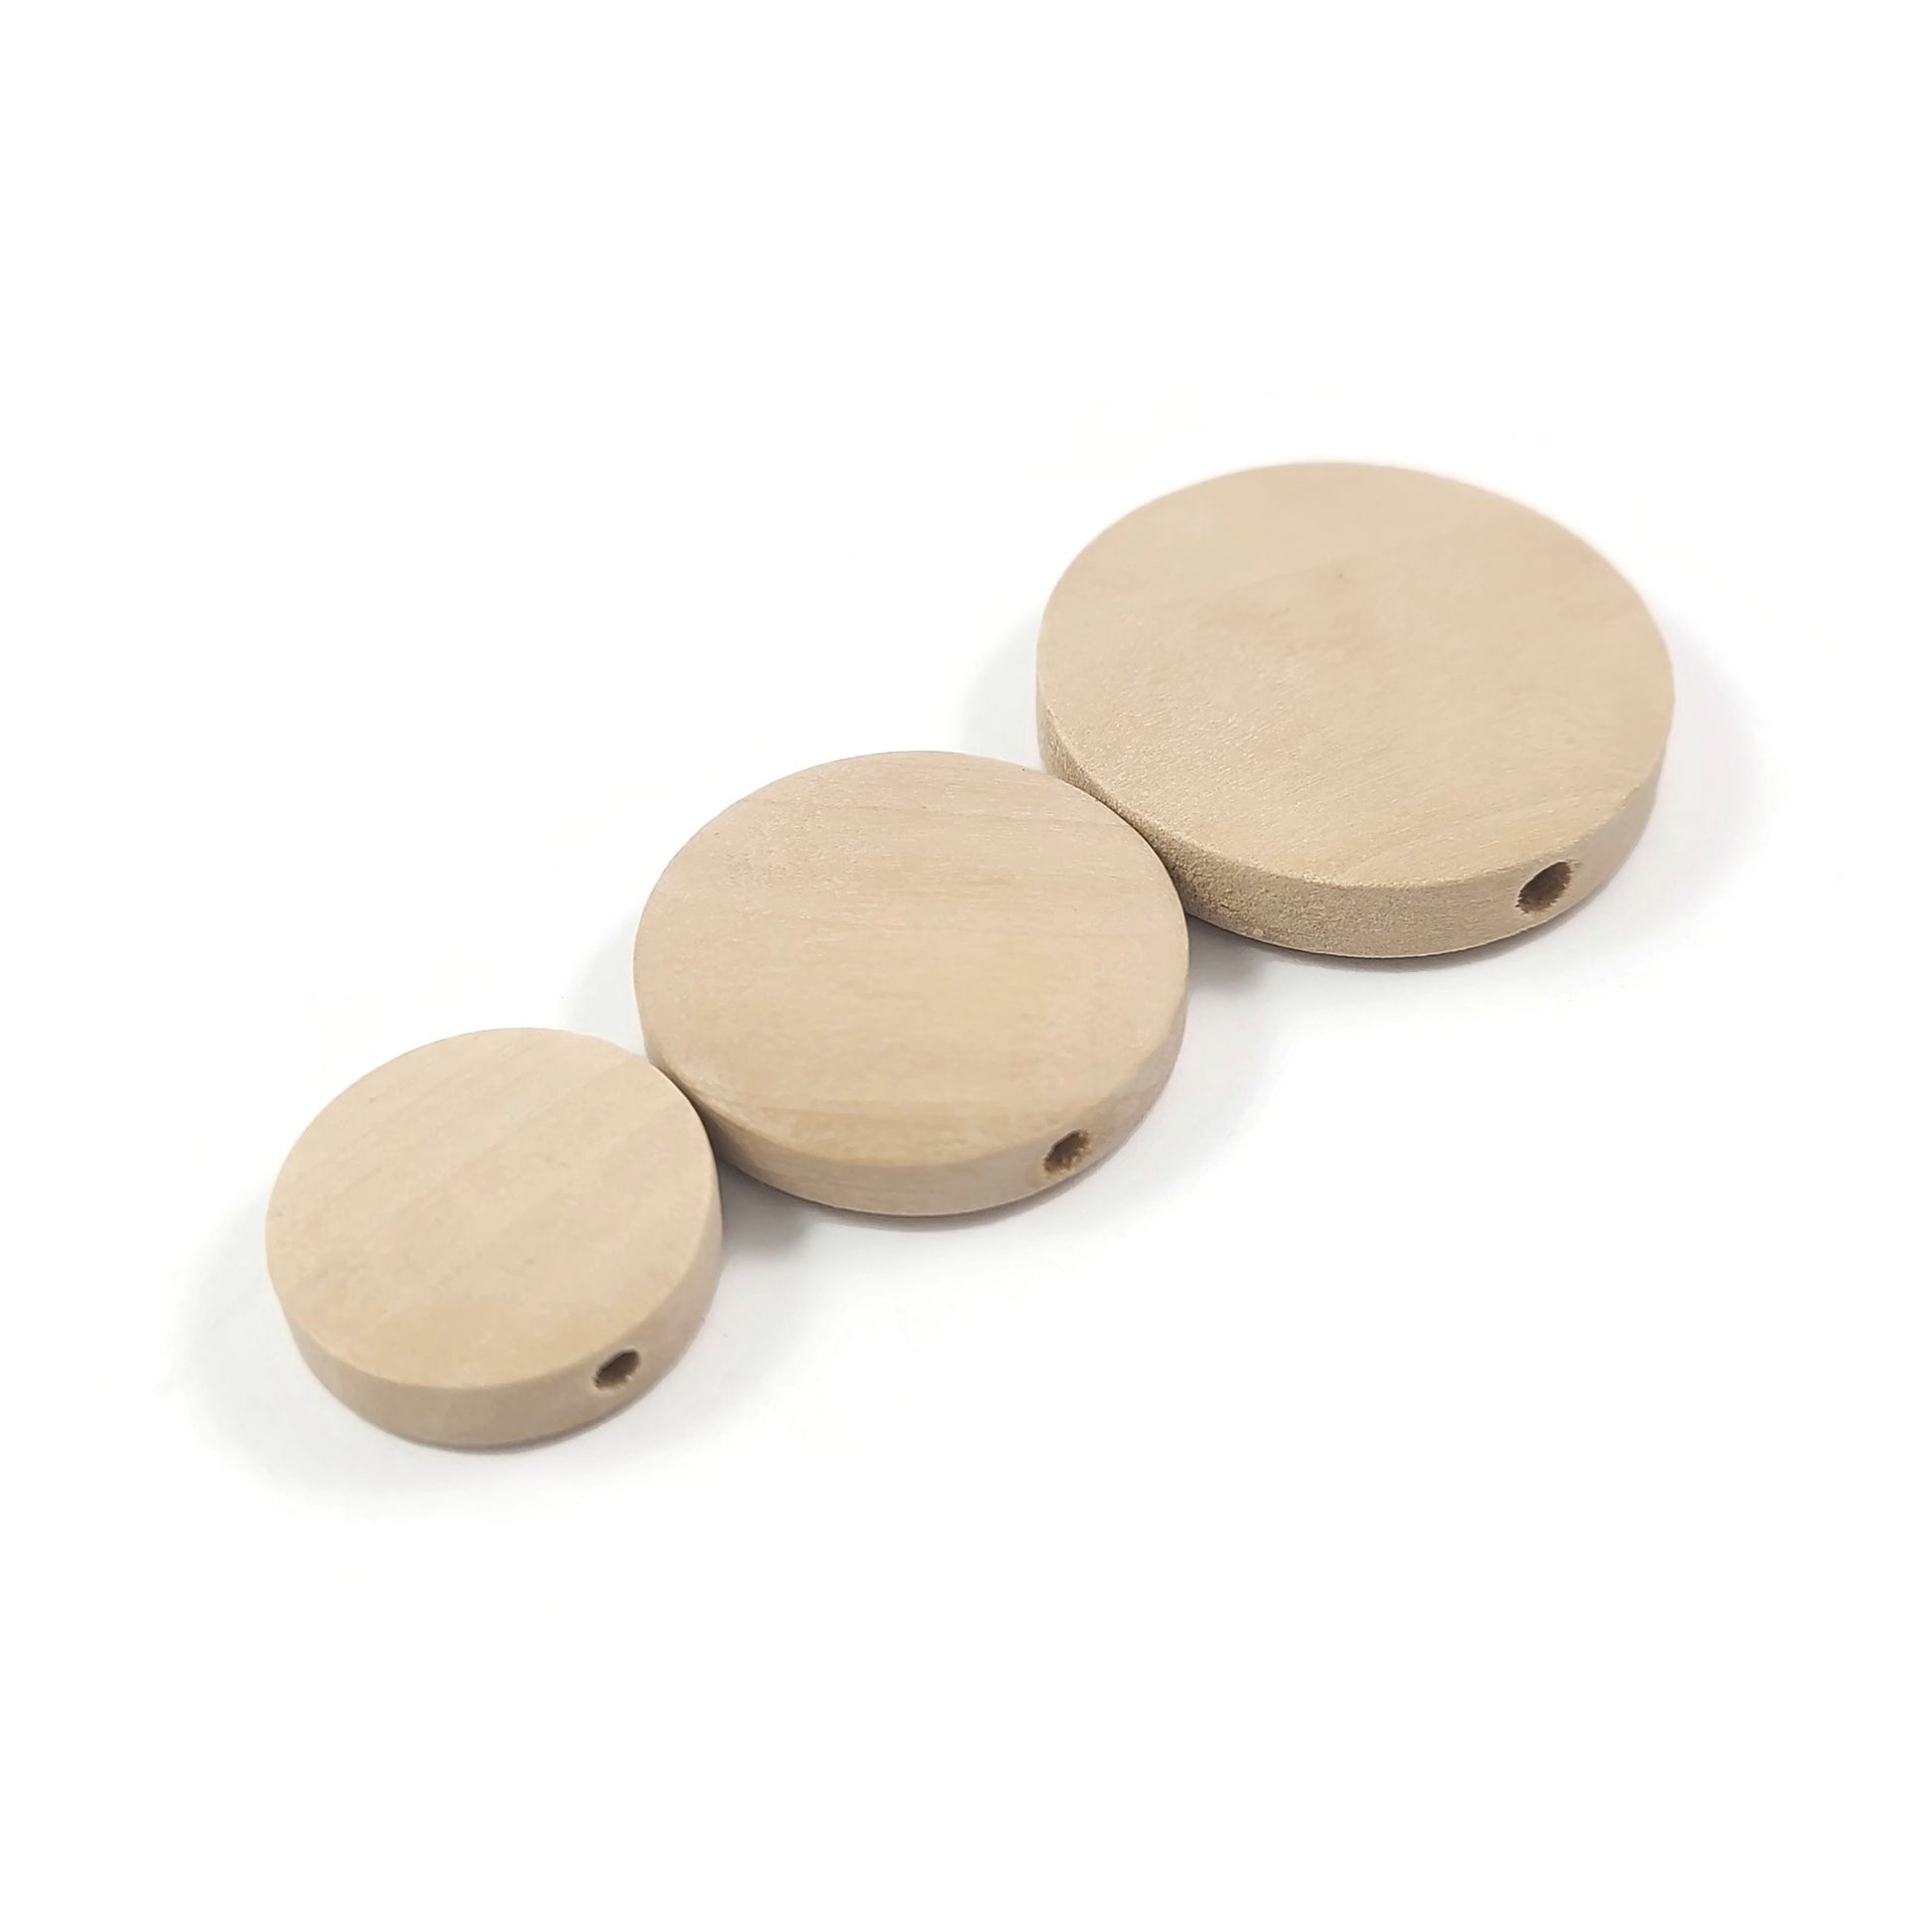 Flat wooden beads 15mm, 20mm or 25mm